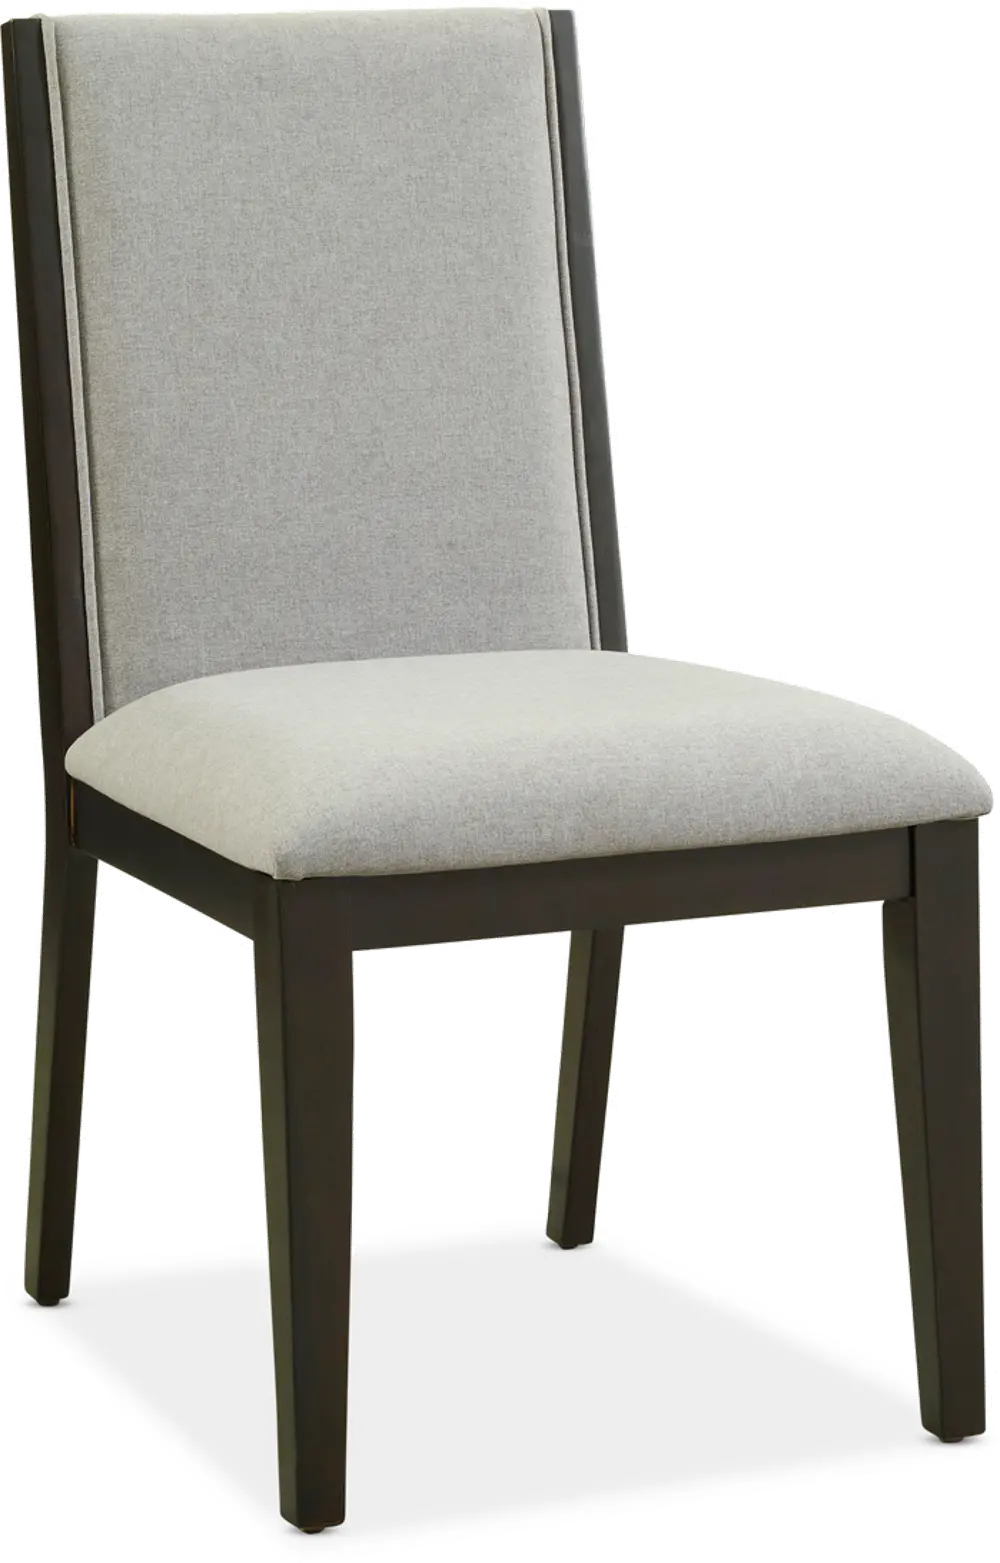 Gray Upholstered Dining Room Chair - Crosby Street-1